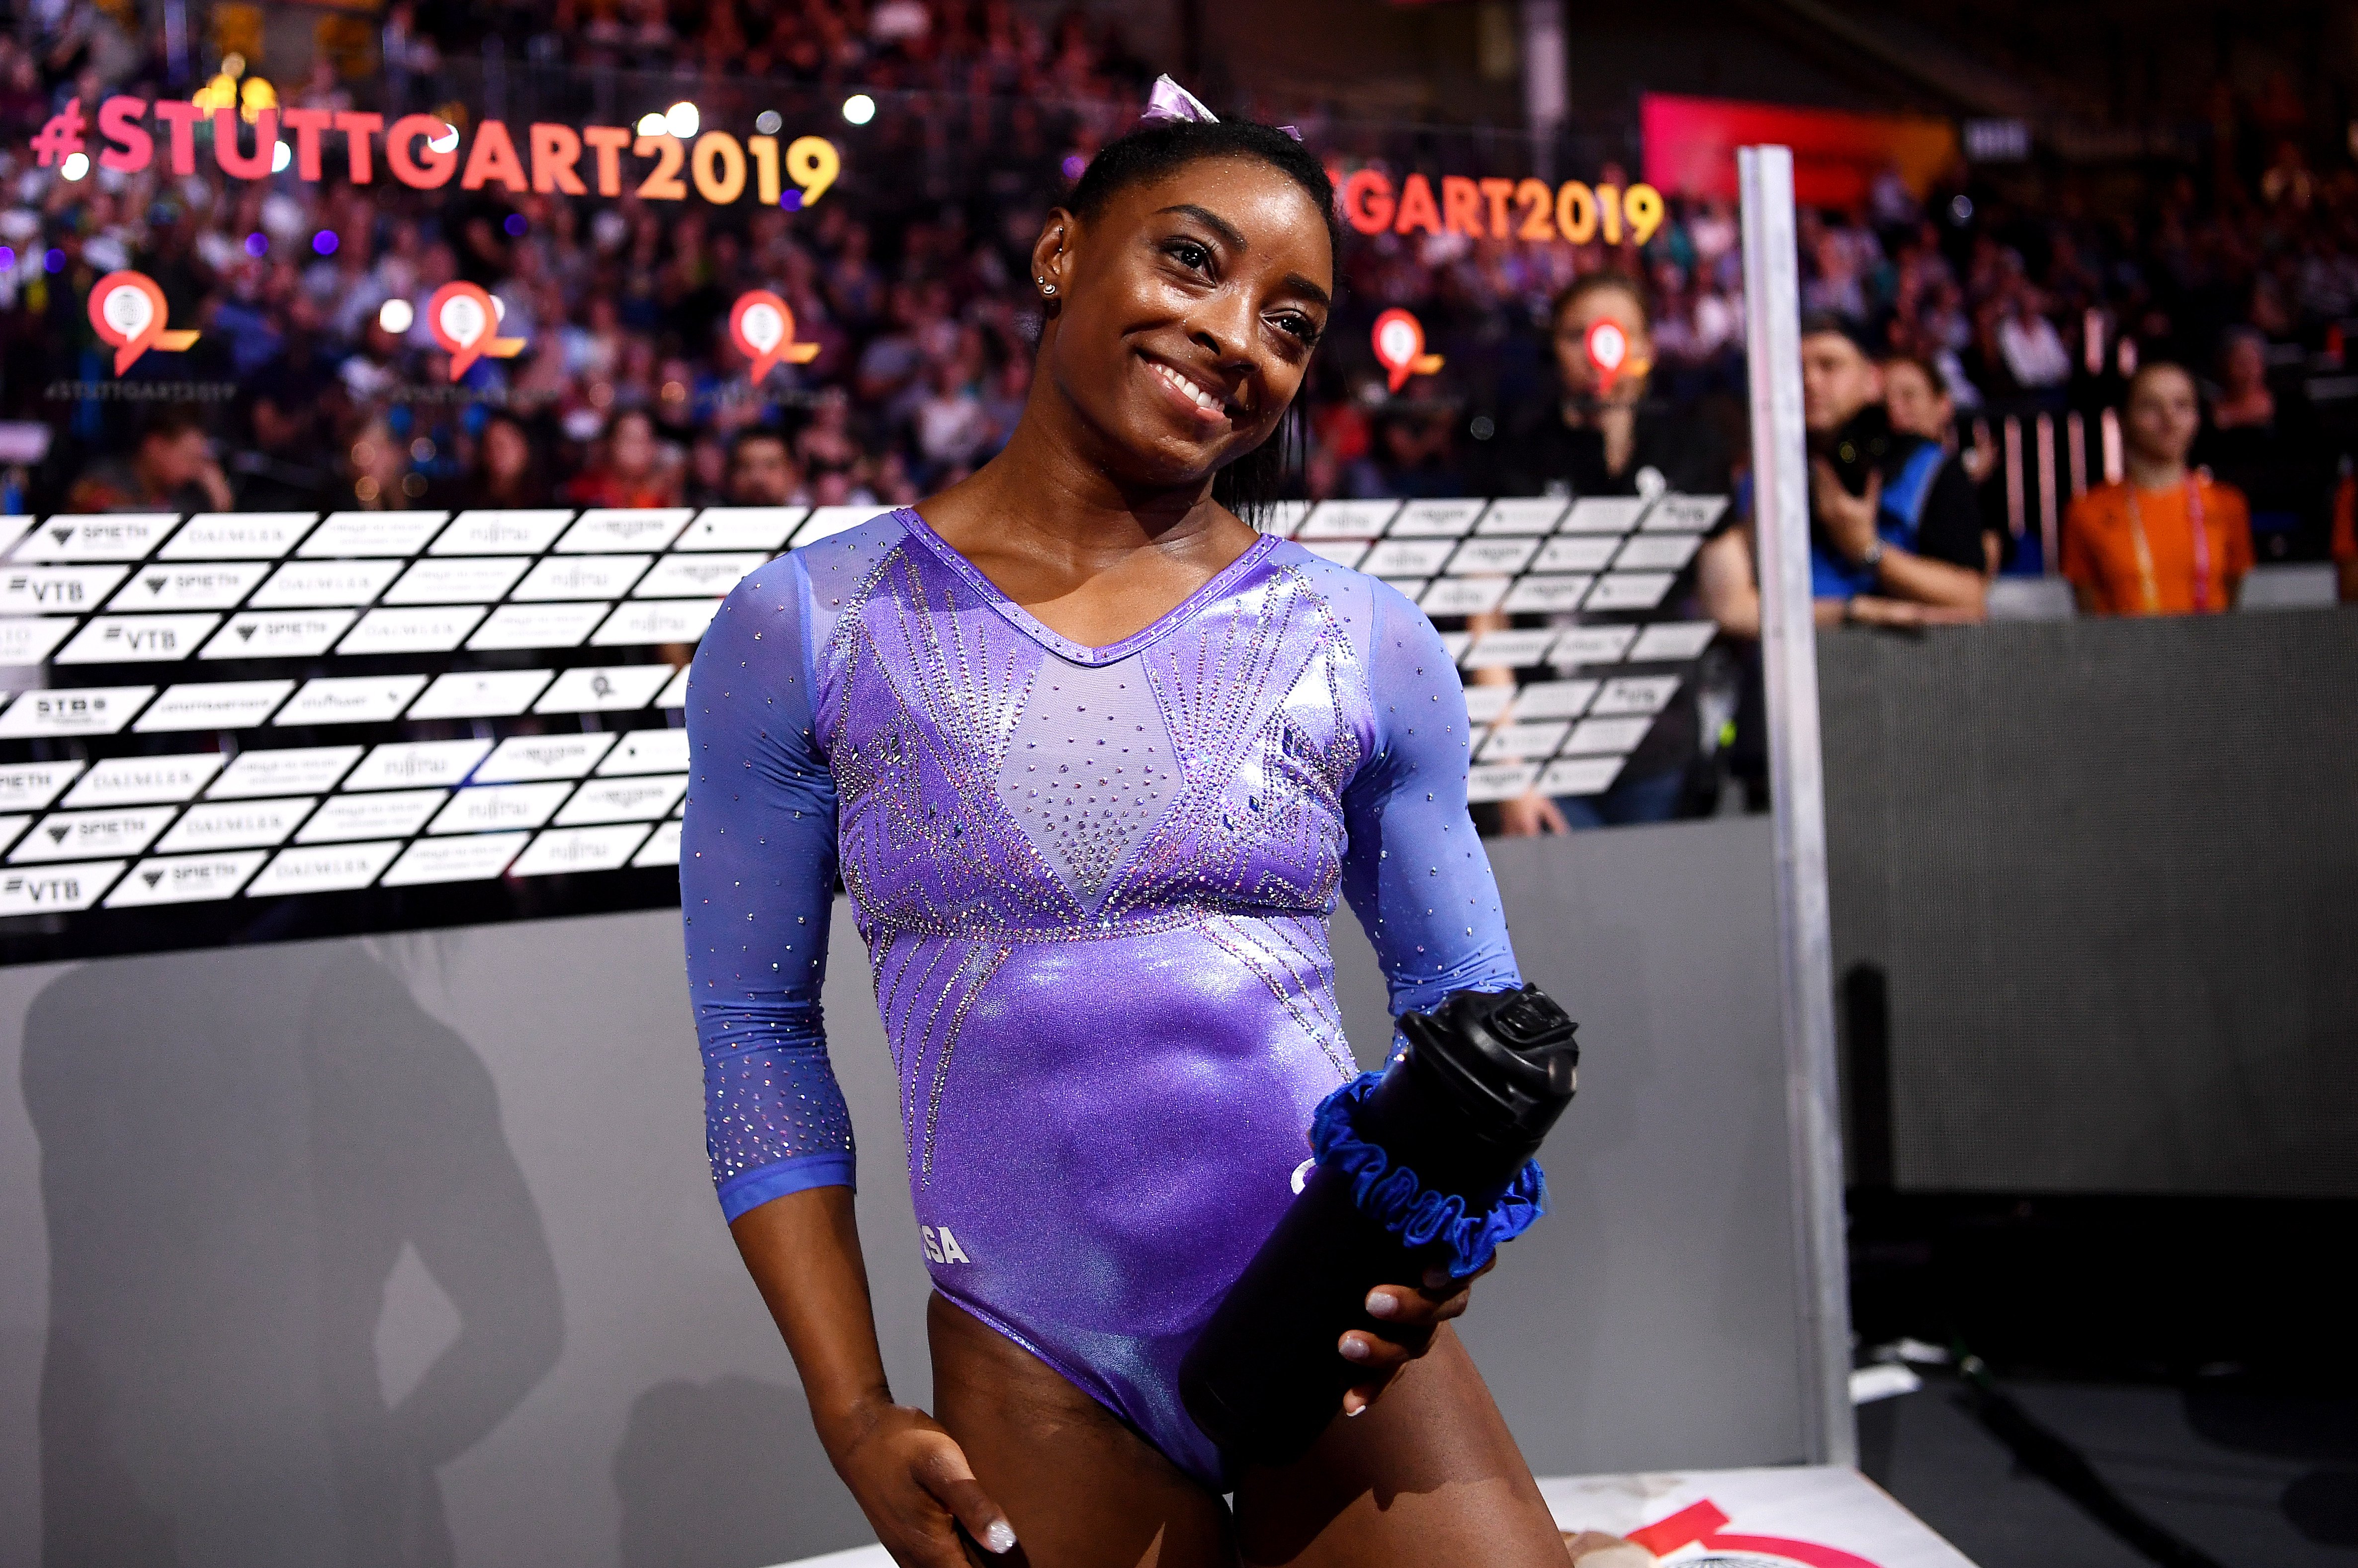 Simone Biles celebrates winning gold in the Women's Floor Final during day 10 of the 49th FIG Artistic Gymnastics World Championships on October 13, 2019 in Stuttgart, Germany. | Photo: Laurence Griffiths/Getty Images